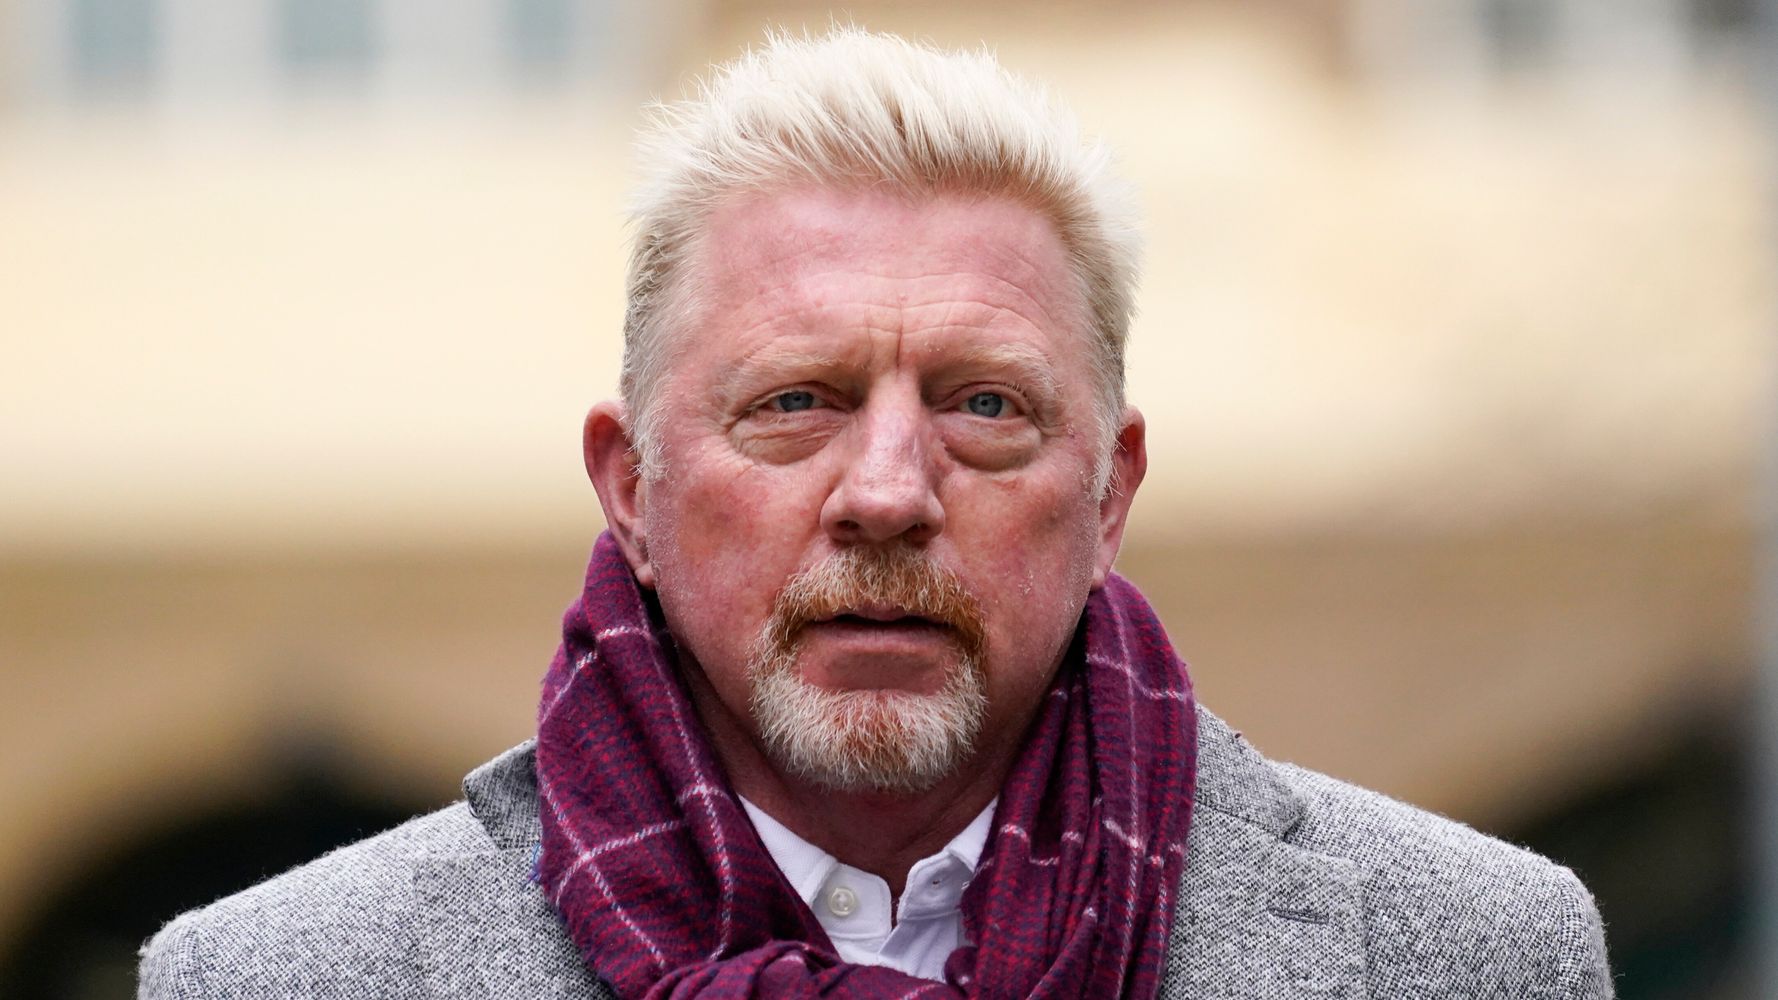 Tennis Great Boris Becker Found Guilty Over Bankruptcy, Could Face Jail